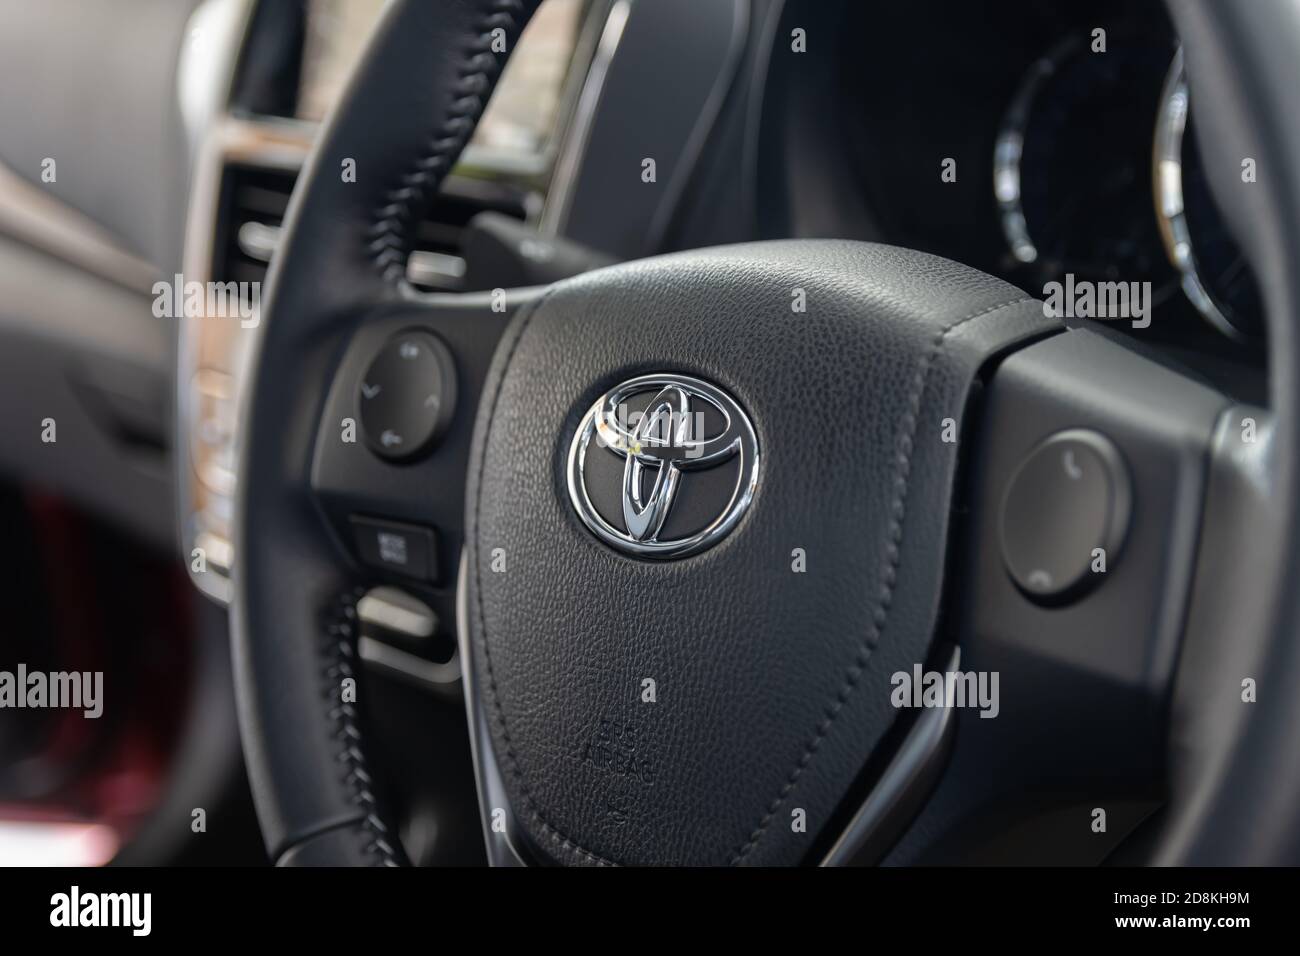 Phayao, Thailand - Sep 13, 2020: Zoom Steering Wheel and Car Dashboard and Car Console of Toyota Yaris Ativ 2020 Stock Photo